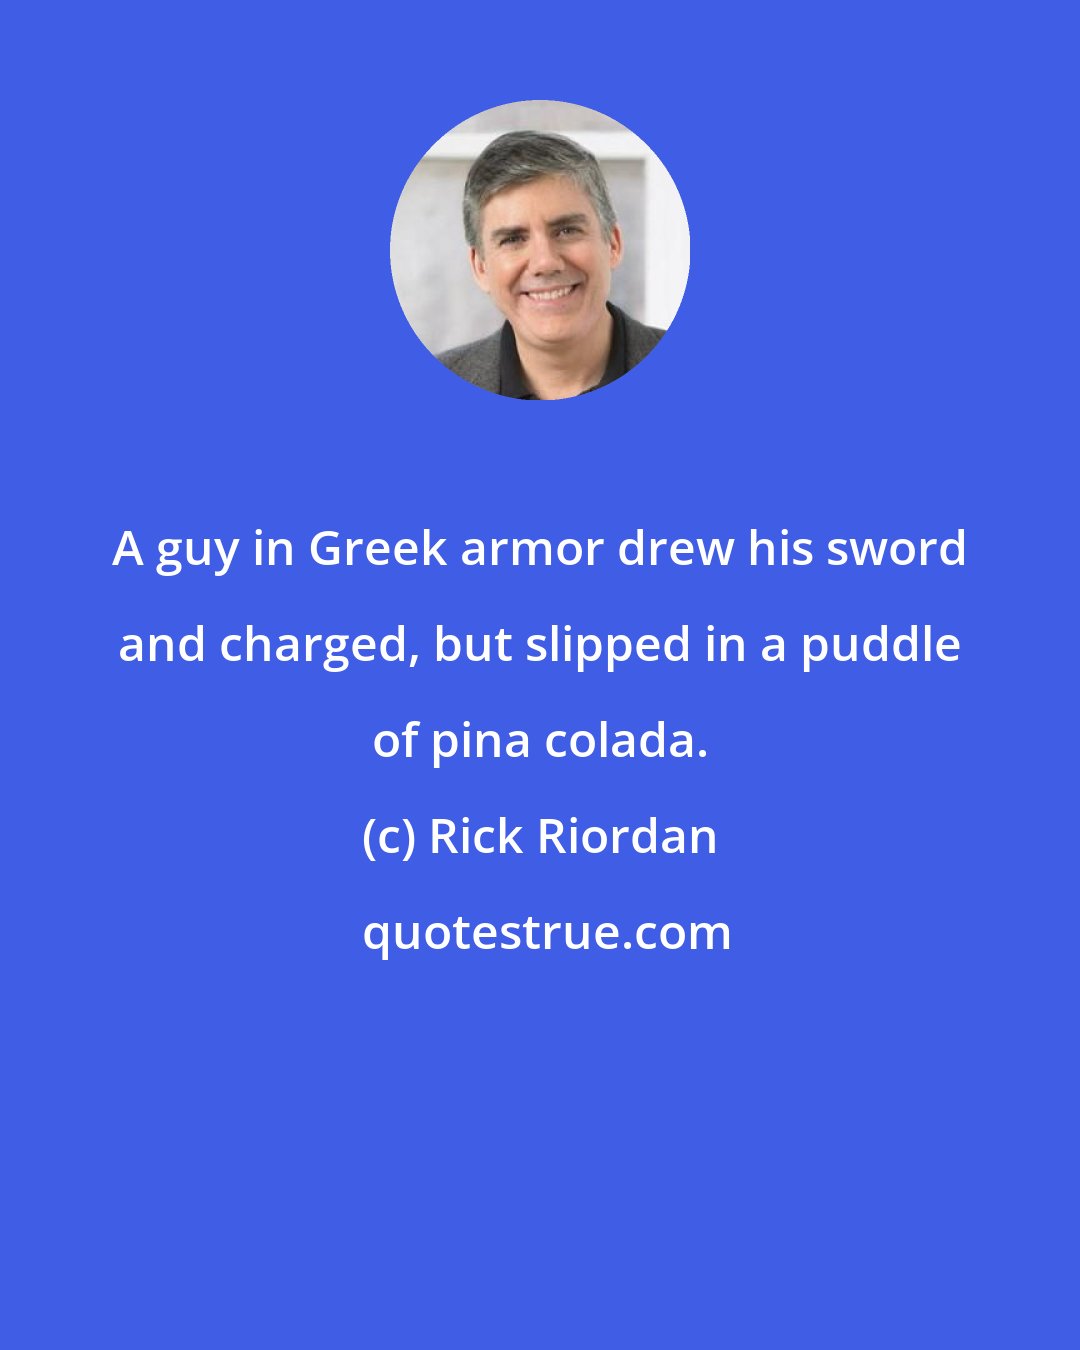 Rick Riordan: A guy in Greek armor drew his sword and charged, but slipped in a puddle of pina colada.